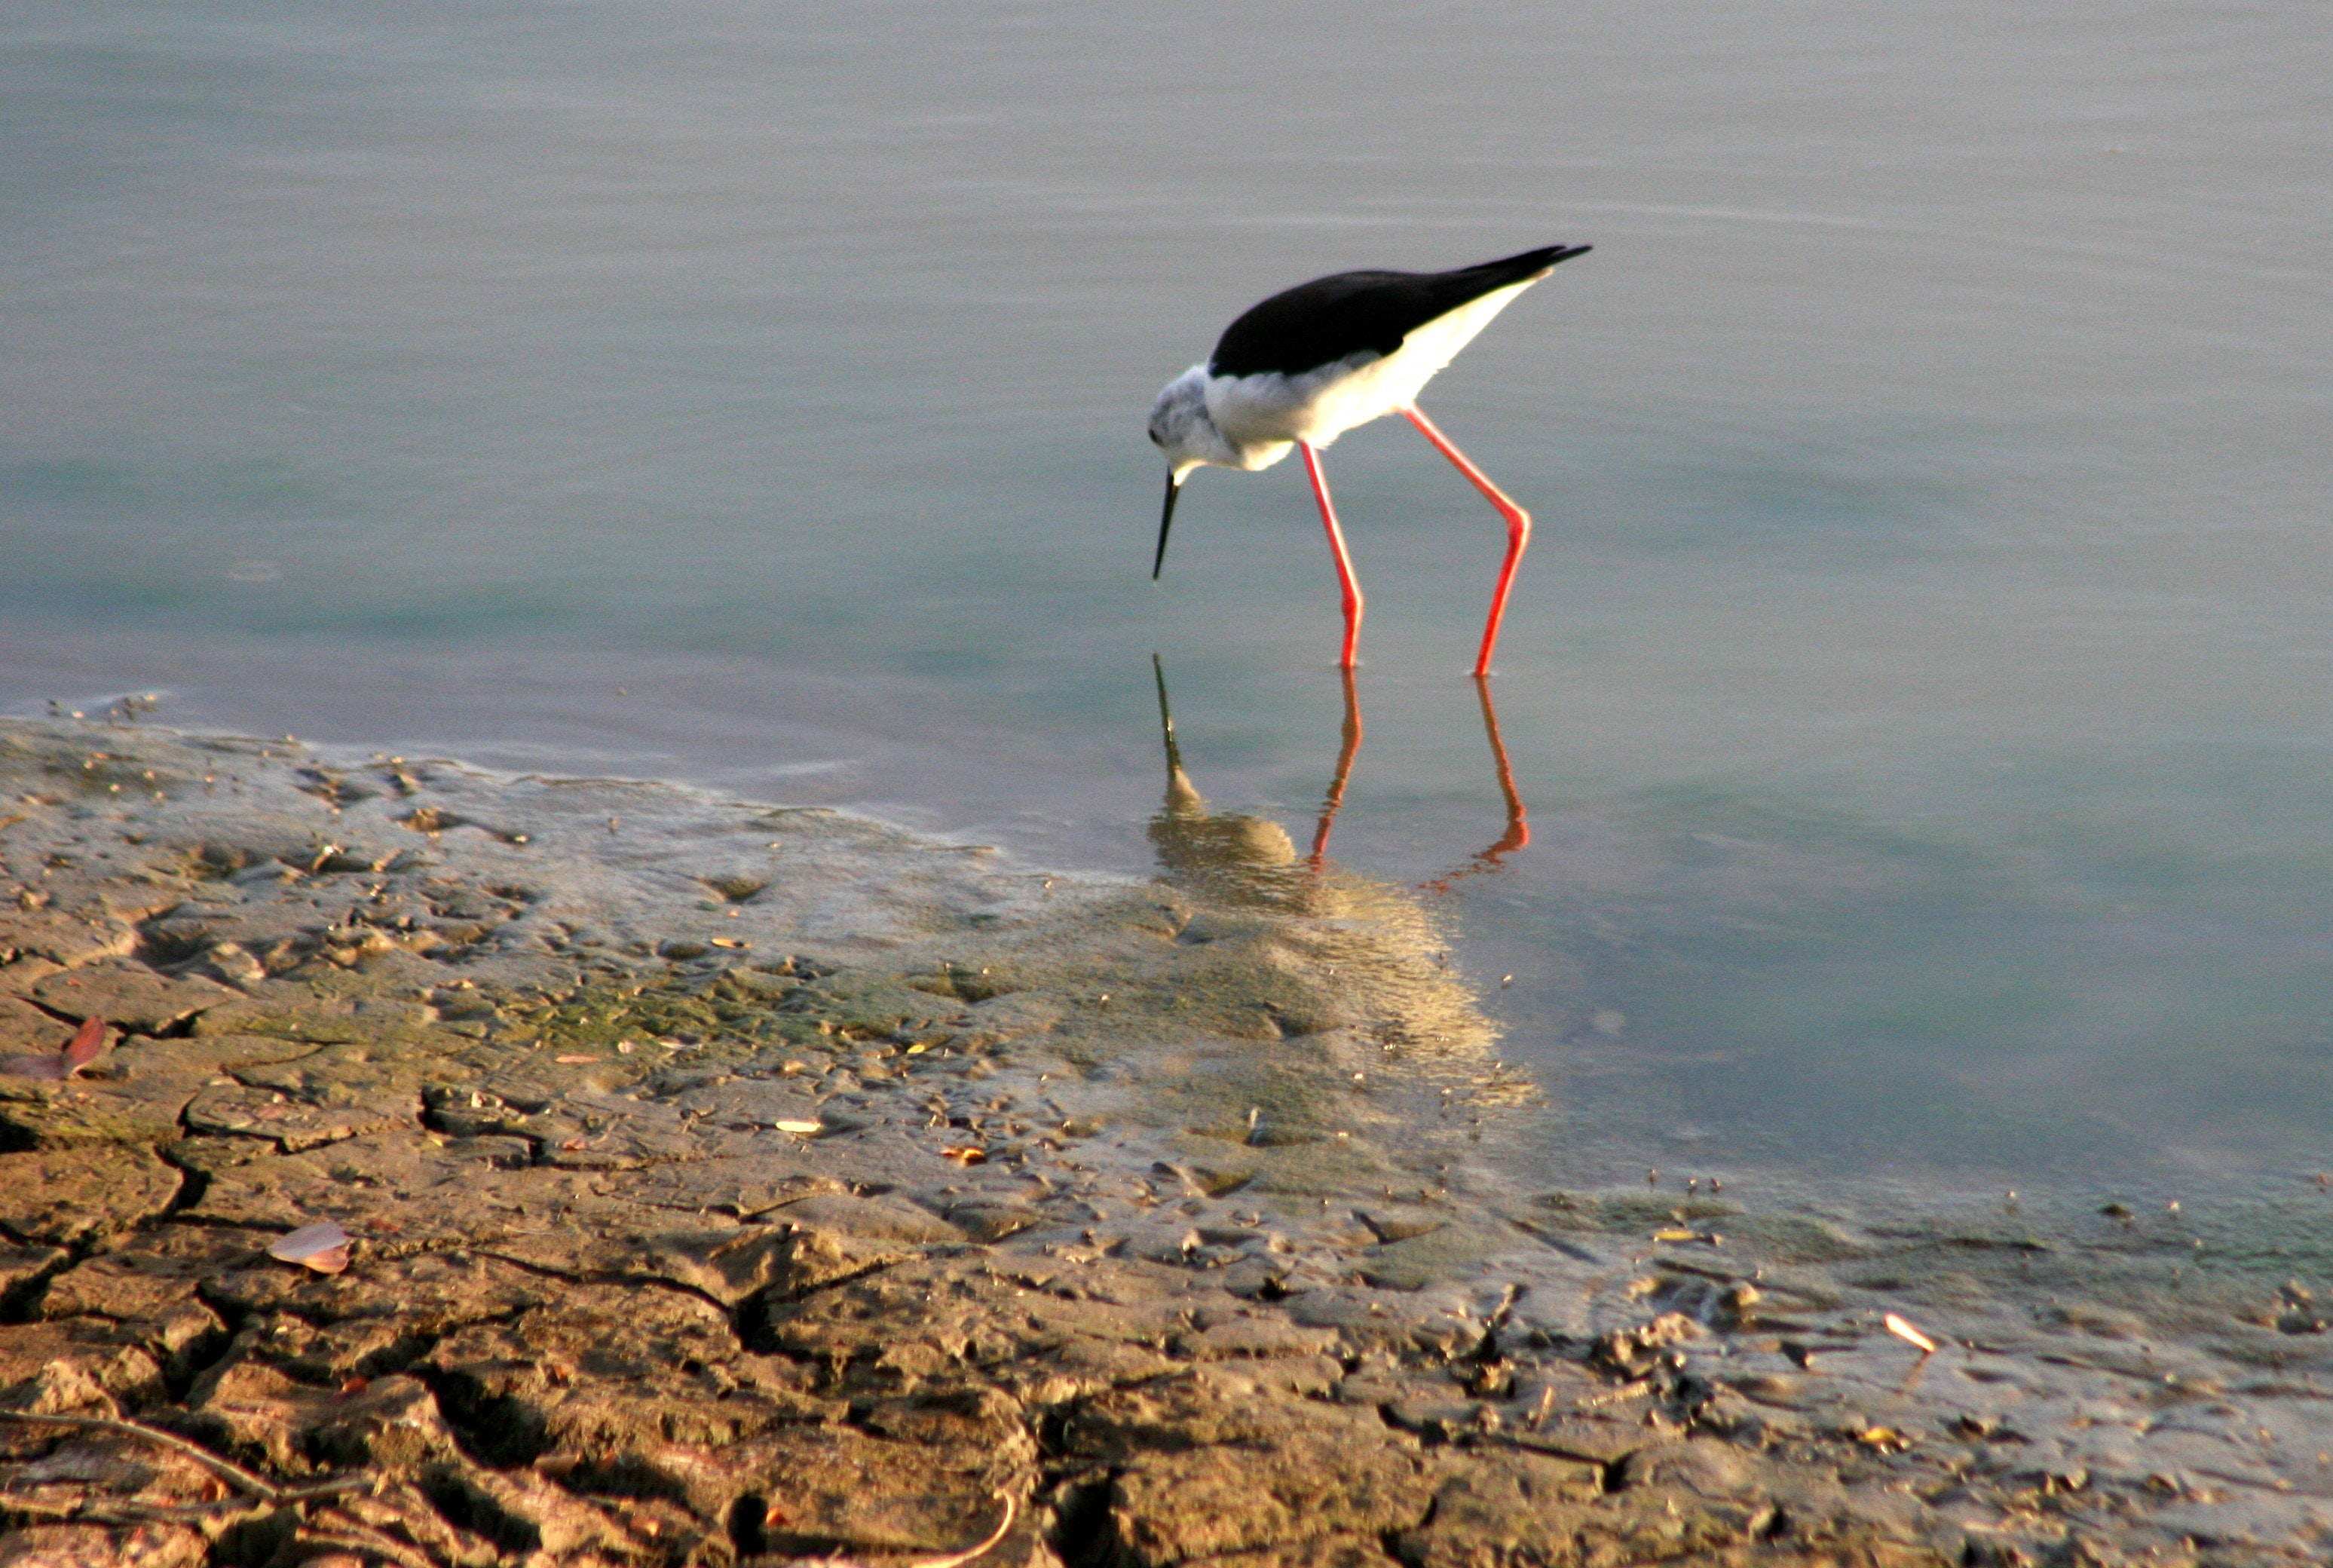 White and Black Long-beaked and Long Legged Bird on Body of Water Photography, Animal, Reflection, Wild, Water, HQ Photo